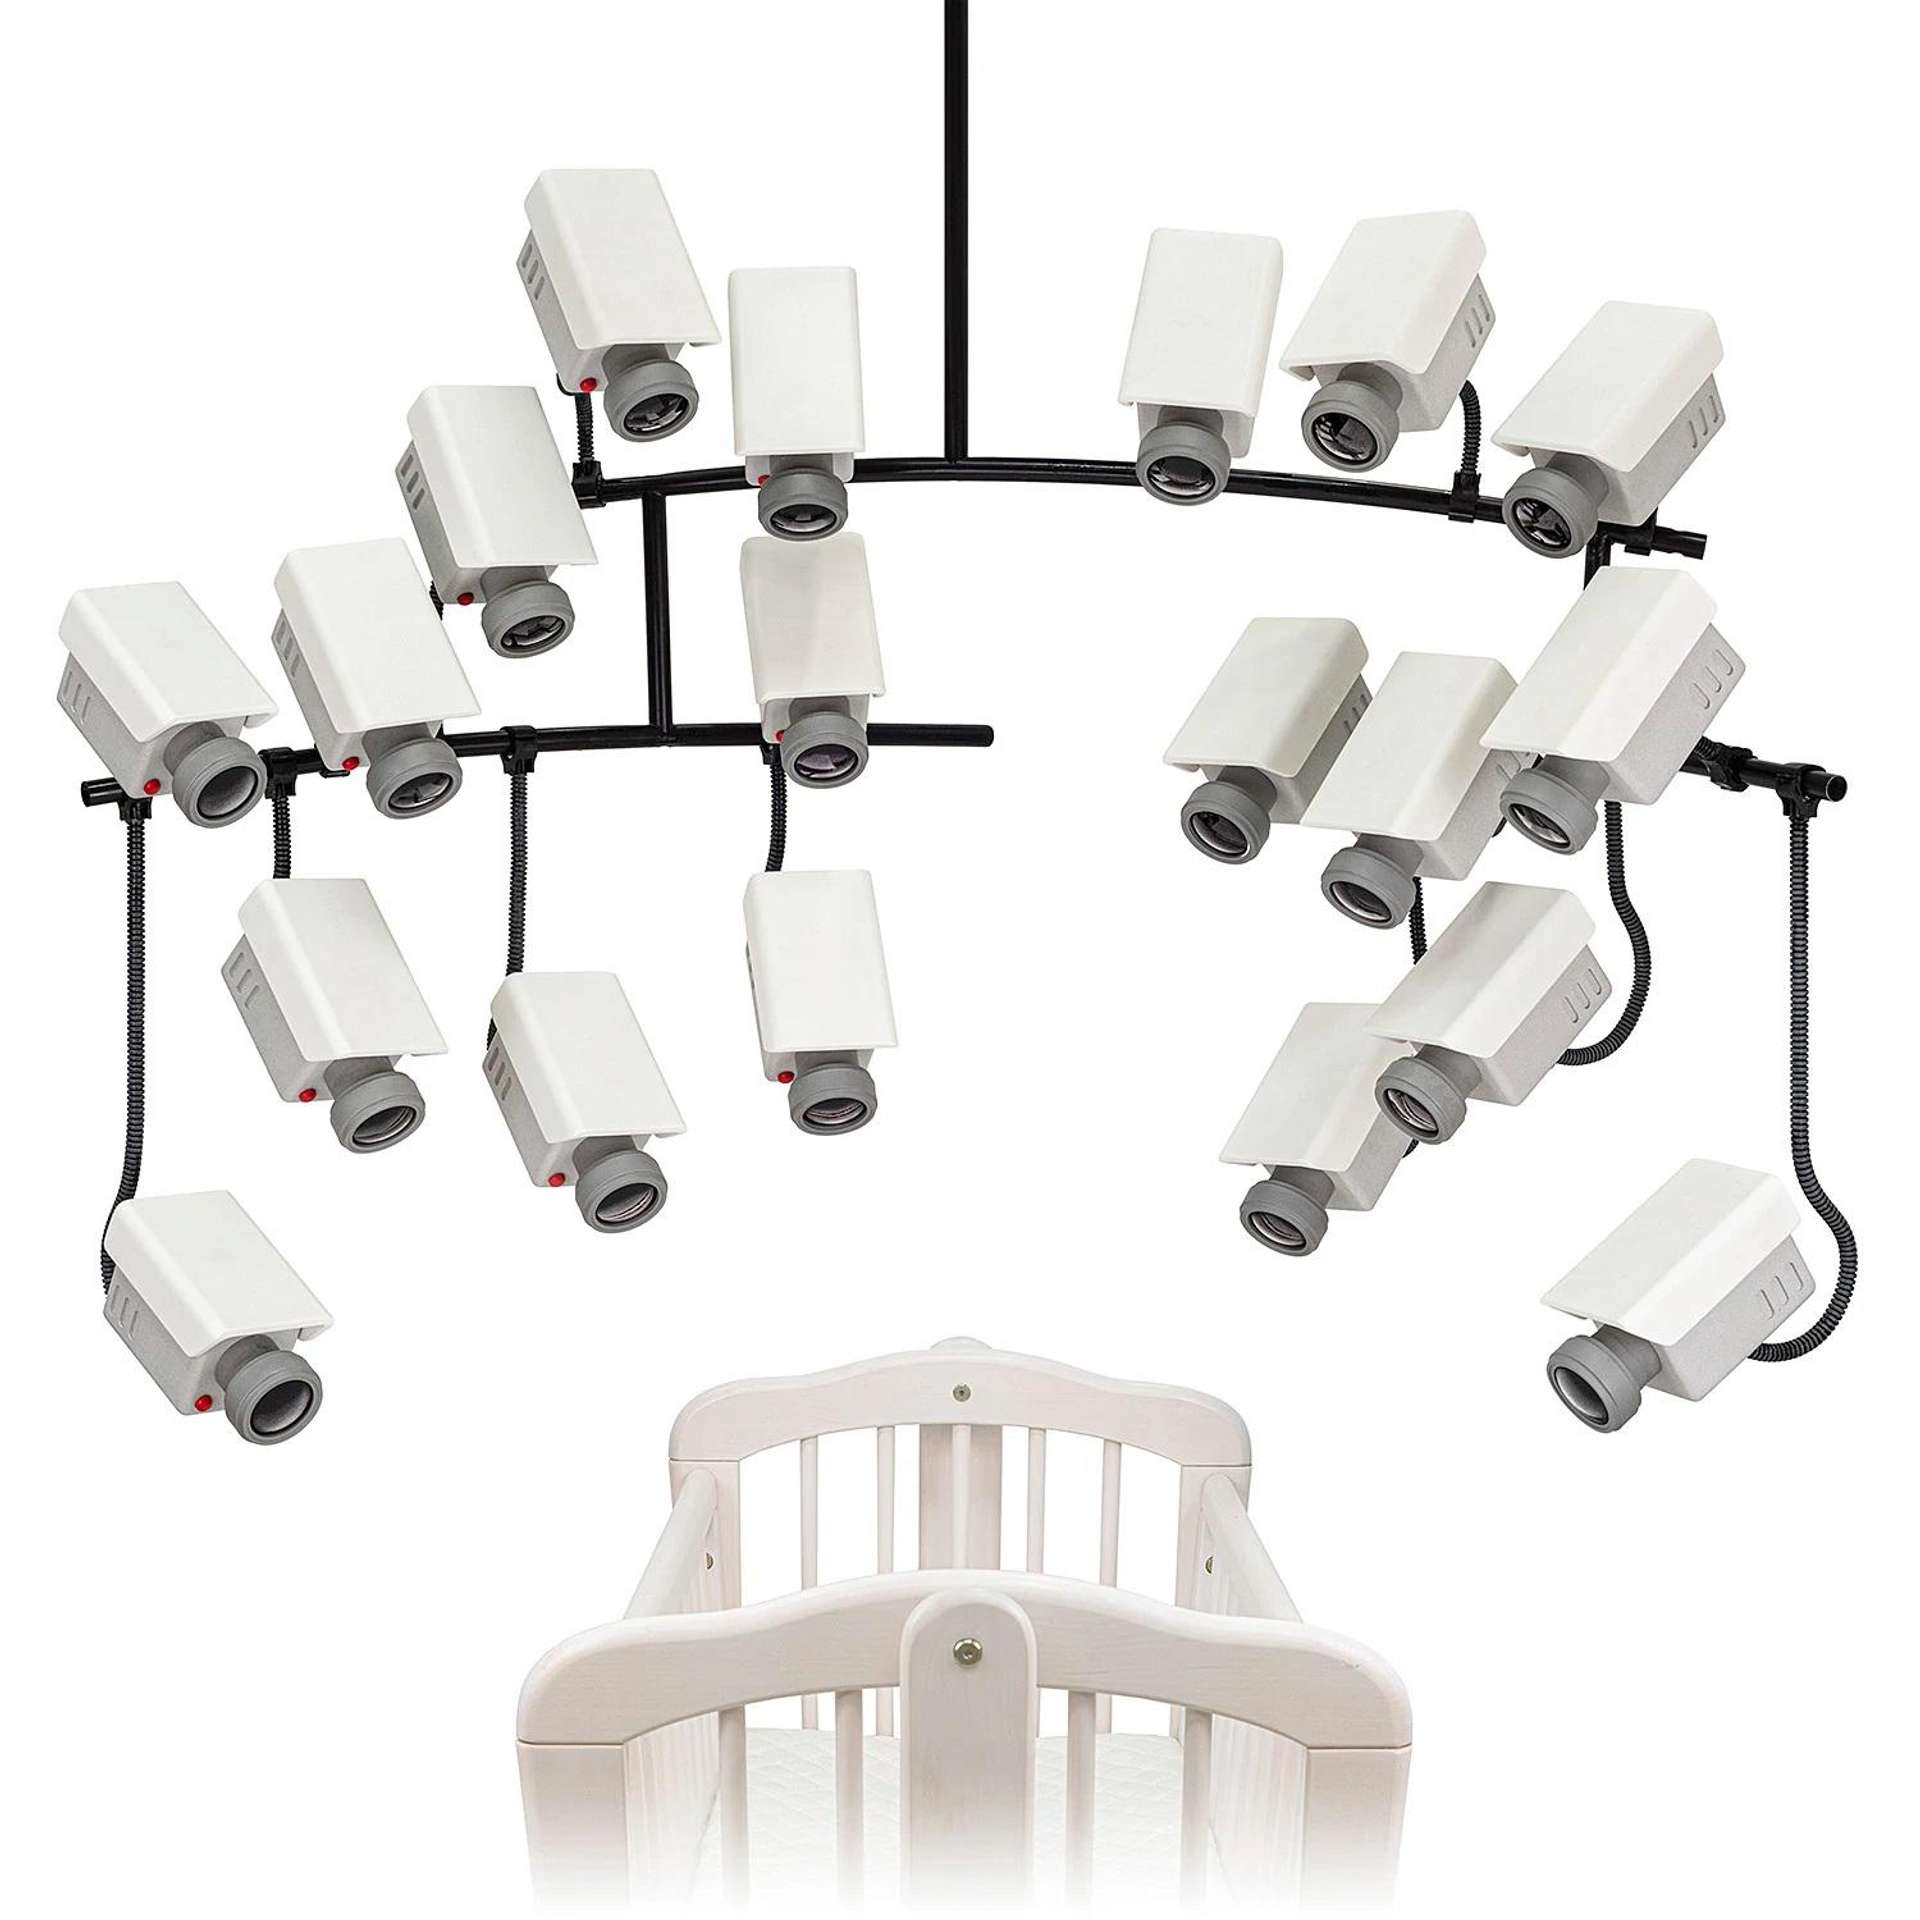 The Banksy™ Baby Mobile is a ceiling-mounted stimulus toy featuring no fewer than 19 mock CCTV cameras that comments cheekily on surveillance culture and overprotective parenting in contemporary society.